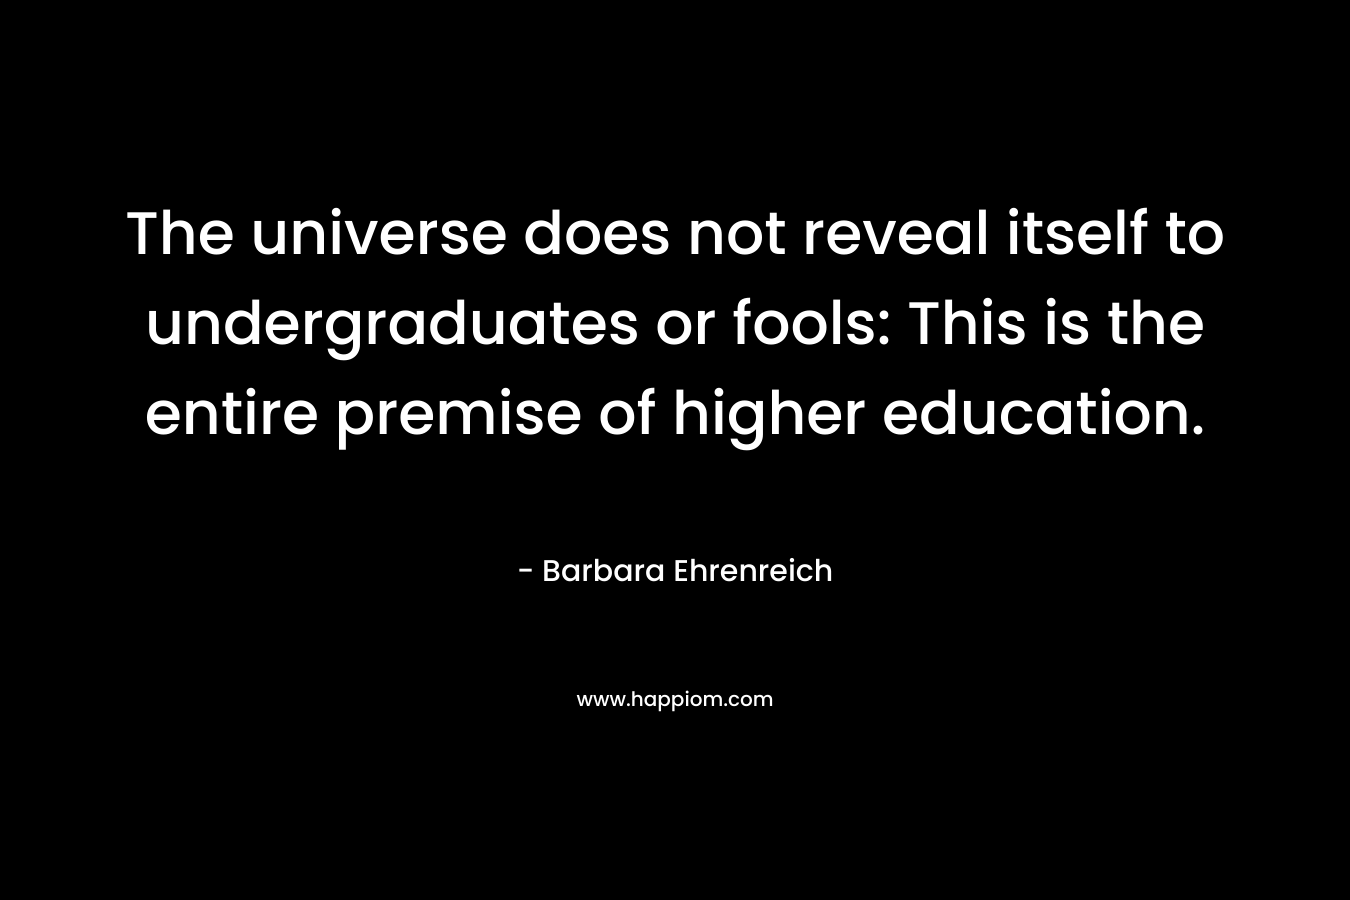 The universe does not reveal itself to undergraduates or fools: This is the entire premise of higher education. – Barbara Ehrenreich